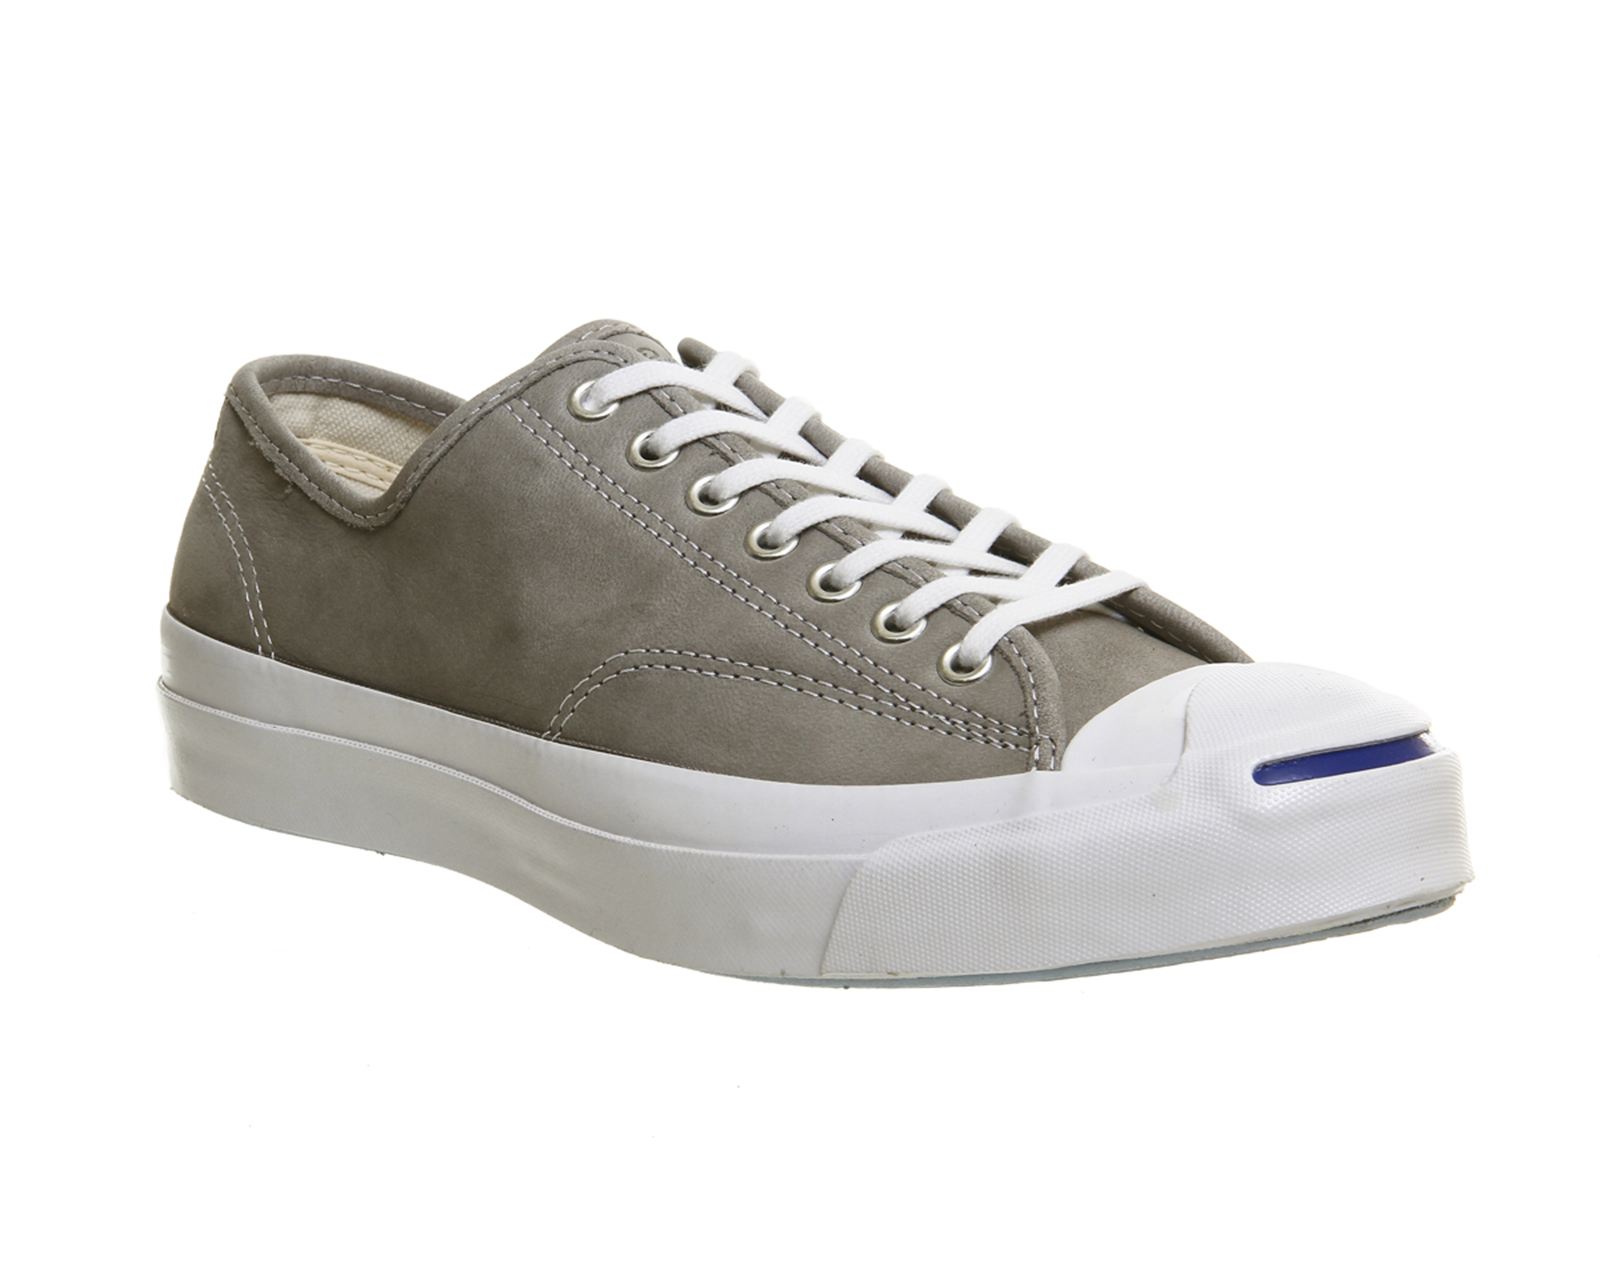 Converse Jack PurcellJack Purcell SignatureDolphin Grey Leather